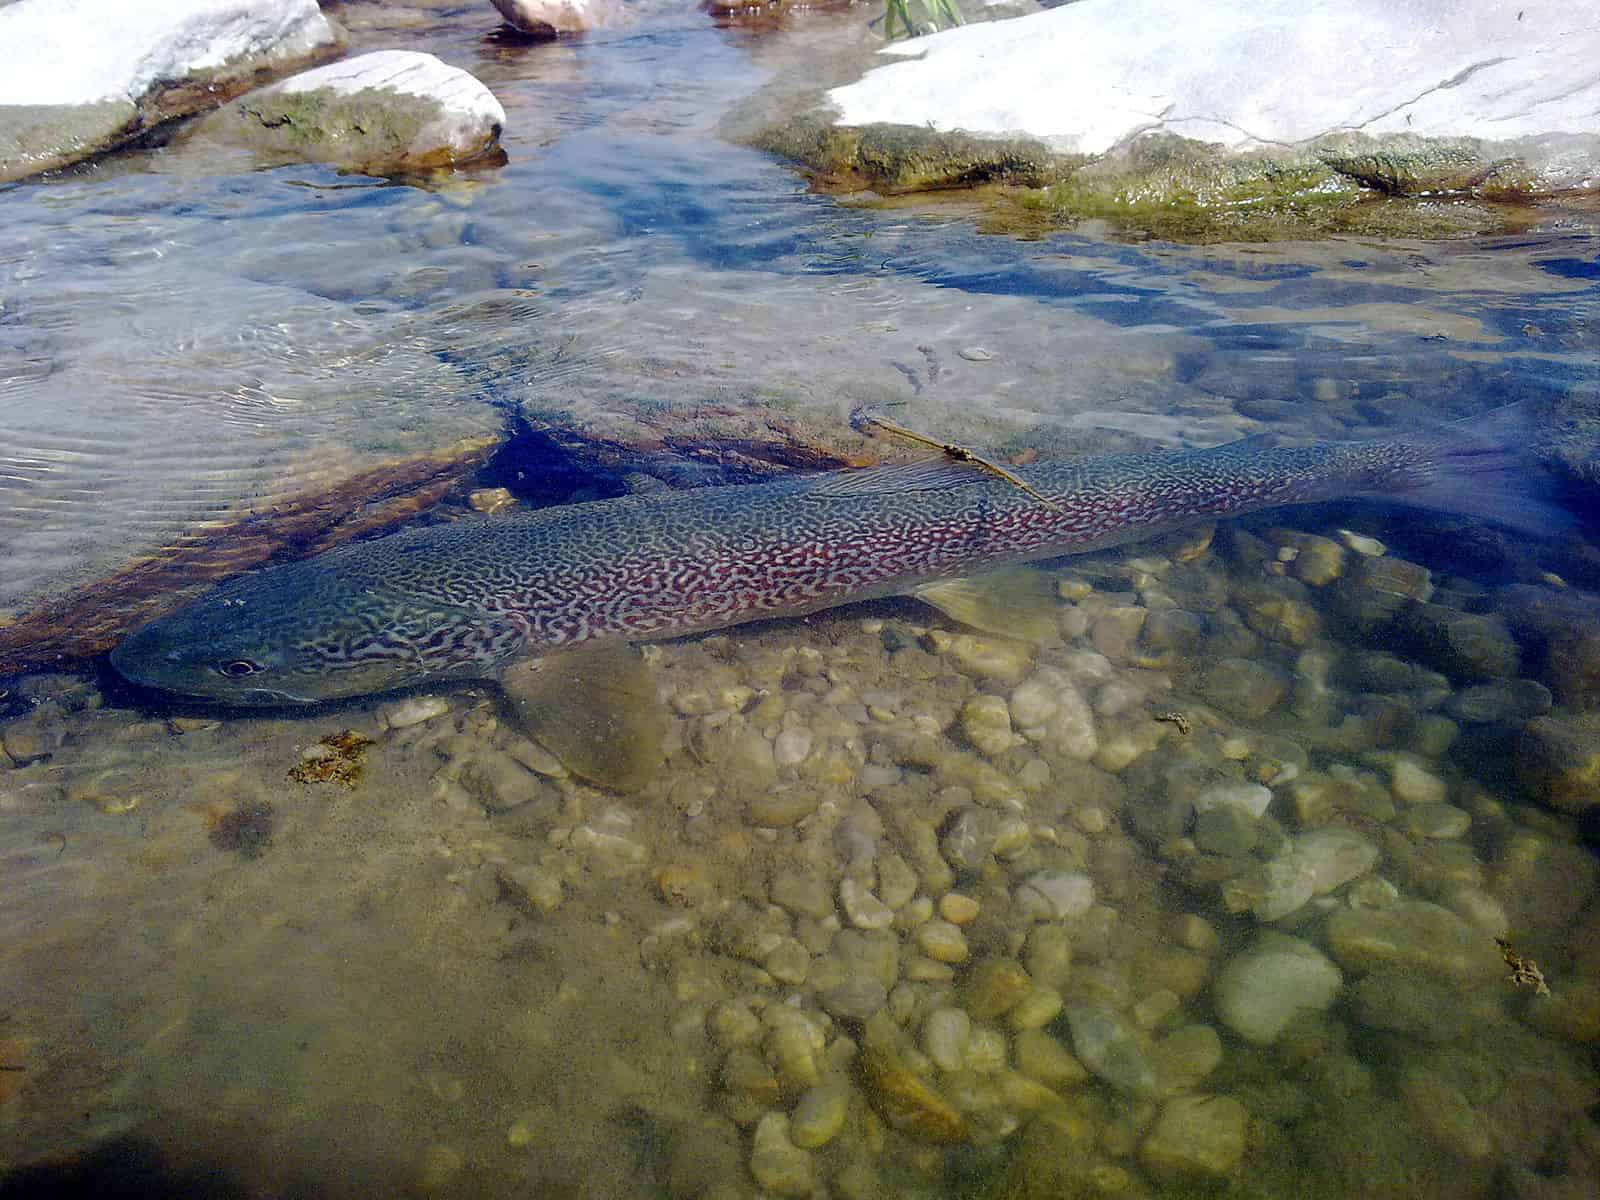 A marble trout swims against a rocky backdrop, just below the surface of the water. 